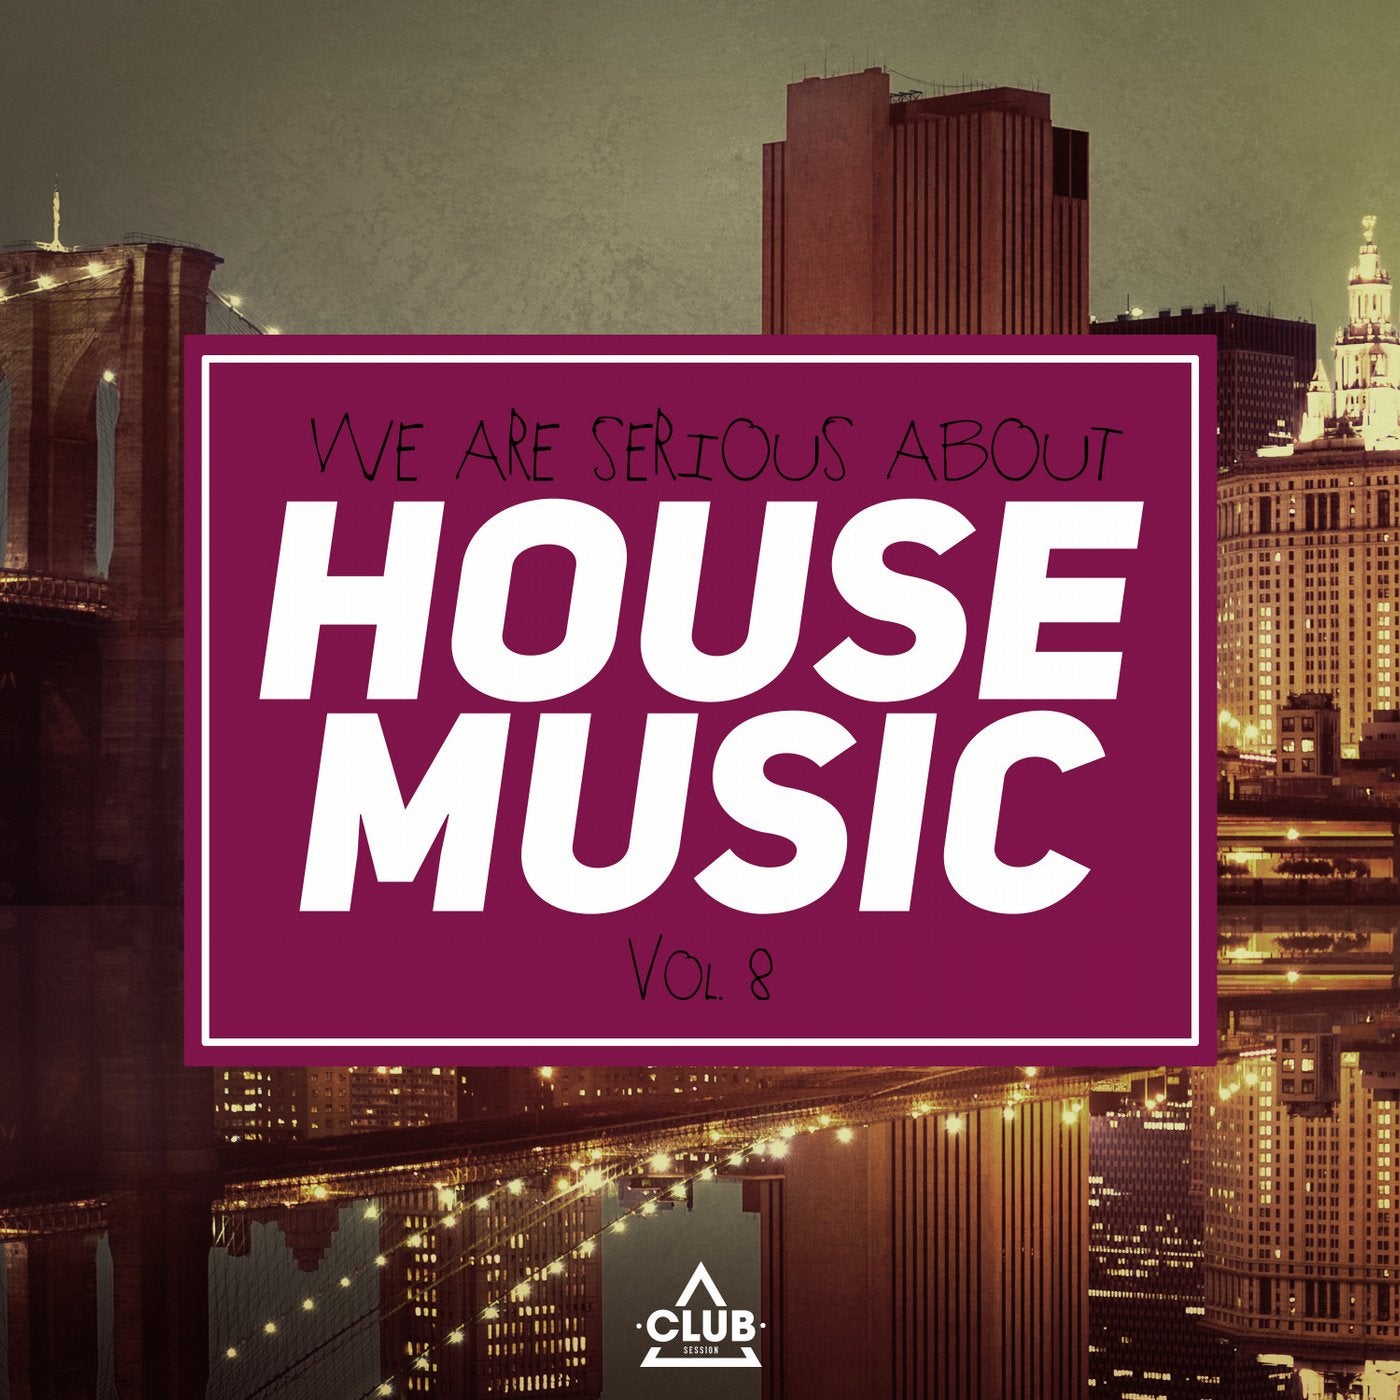 We Are Serious About House Music Vol. 8